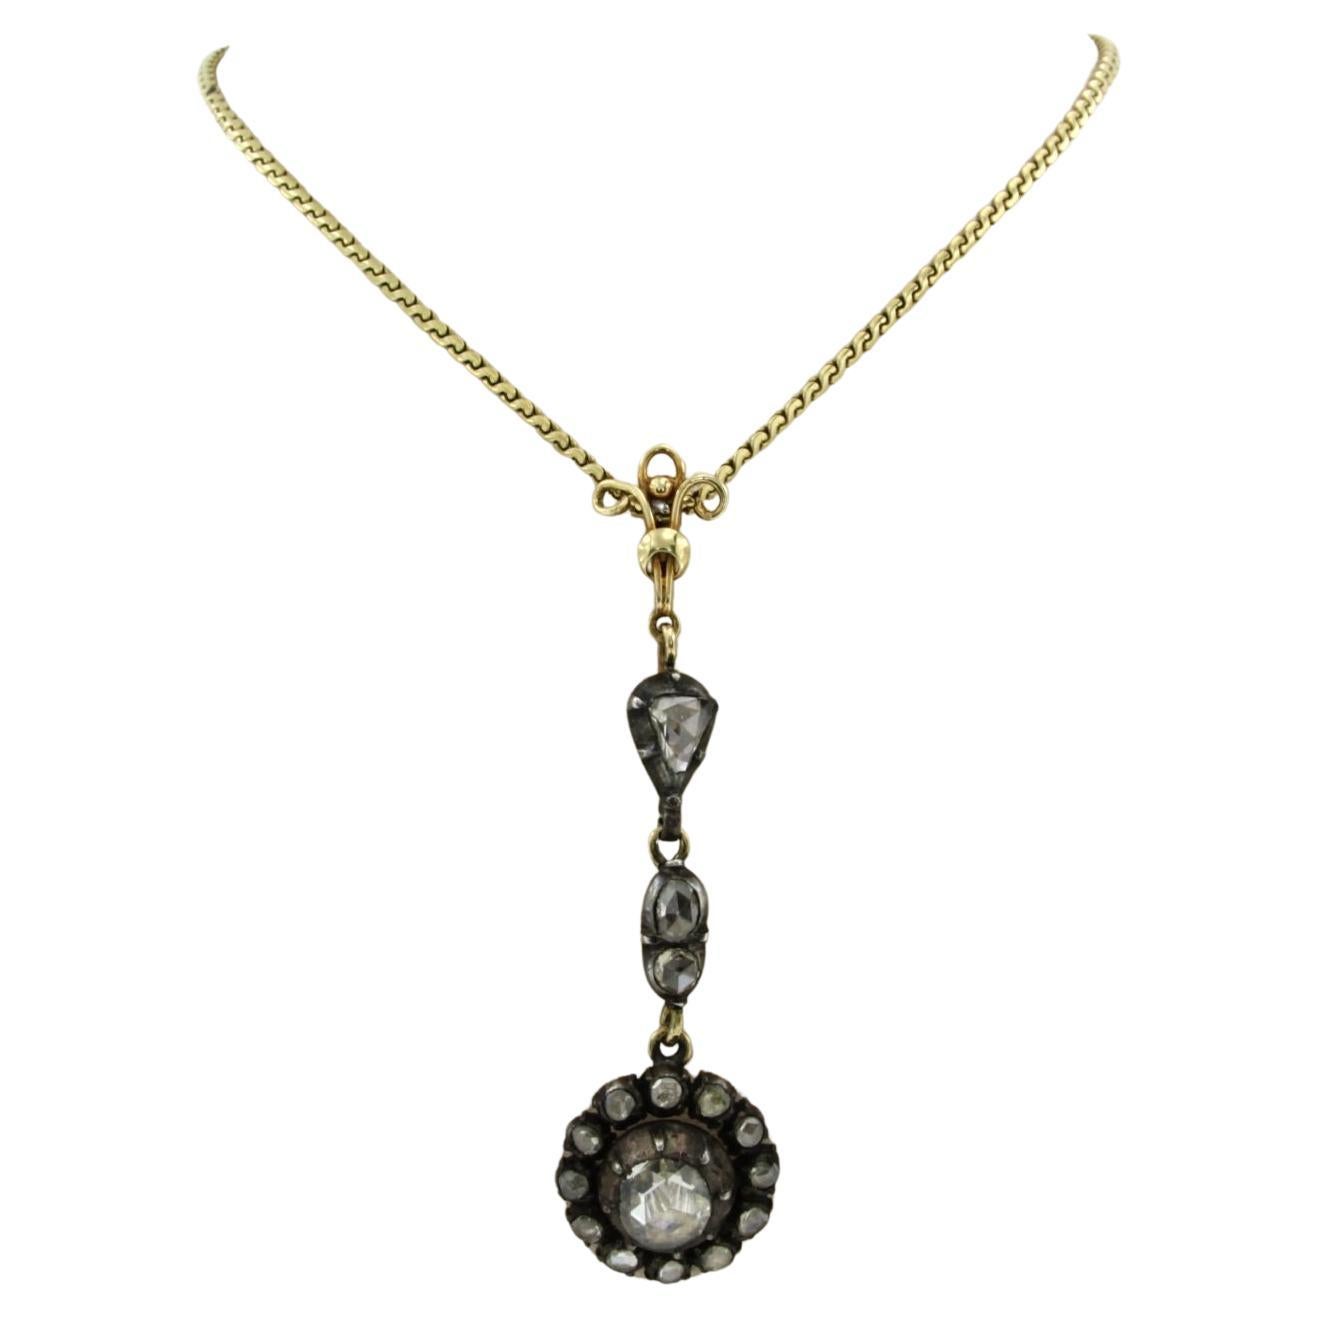 Necklace with pendant set with diamonds 14k yellow gold and silver